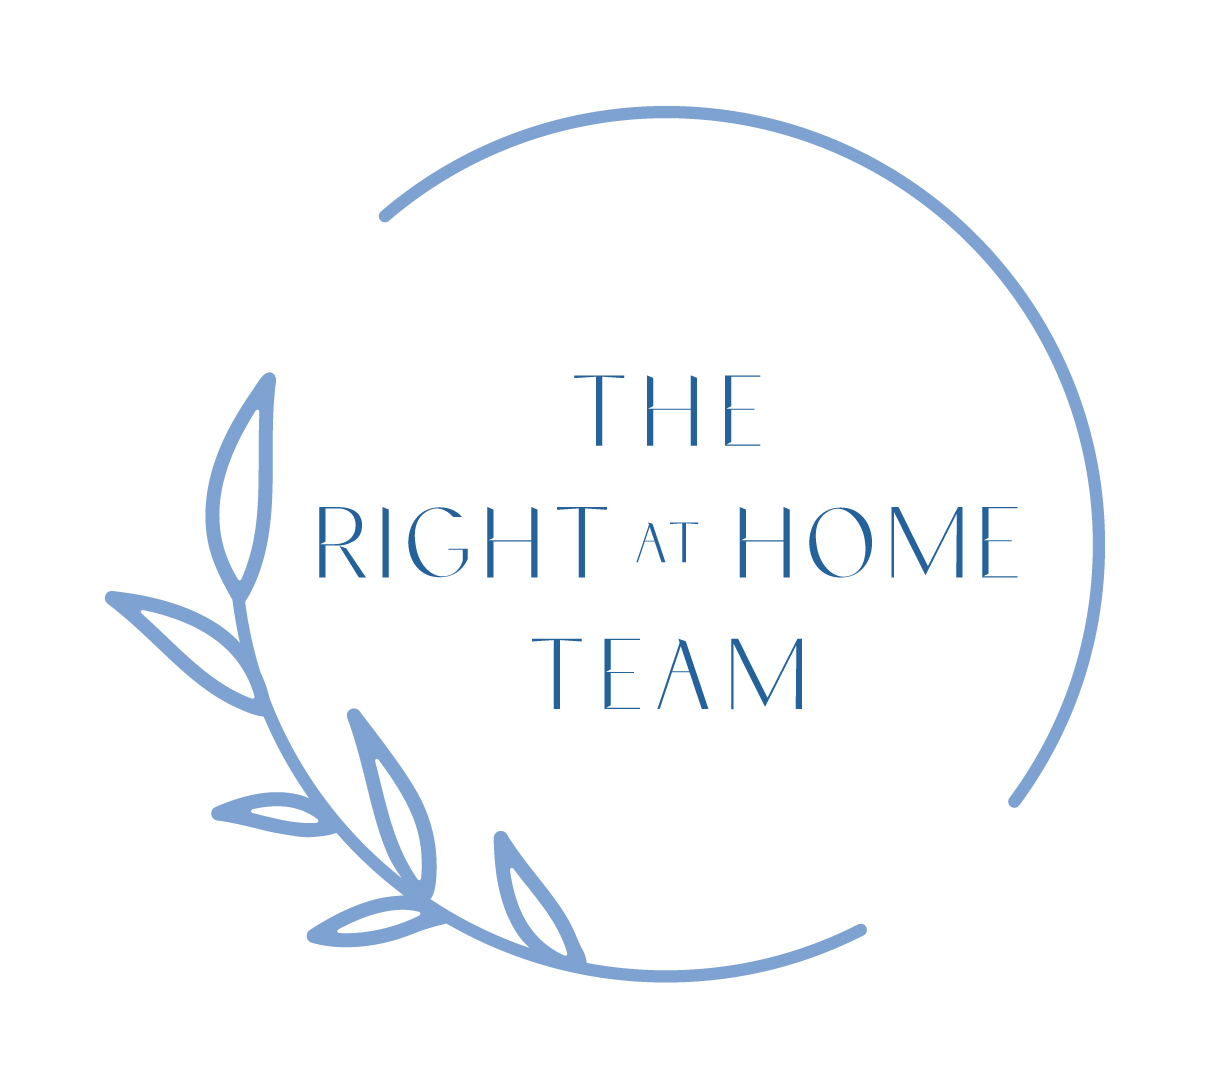 Custom agent bio image from agent The Right at Home Team.